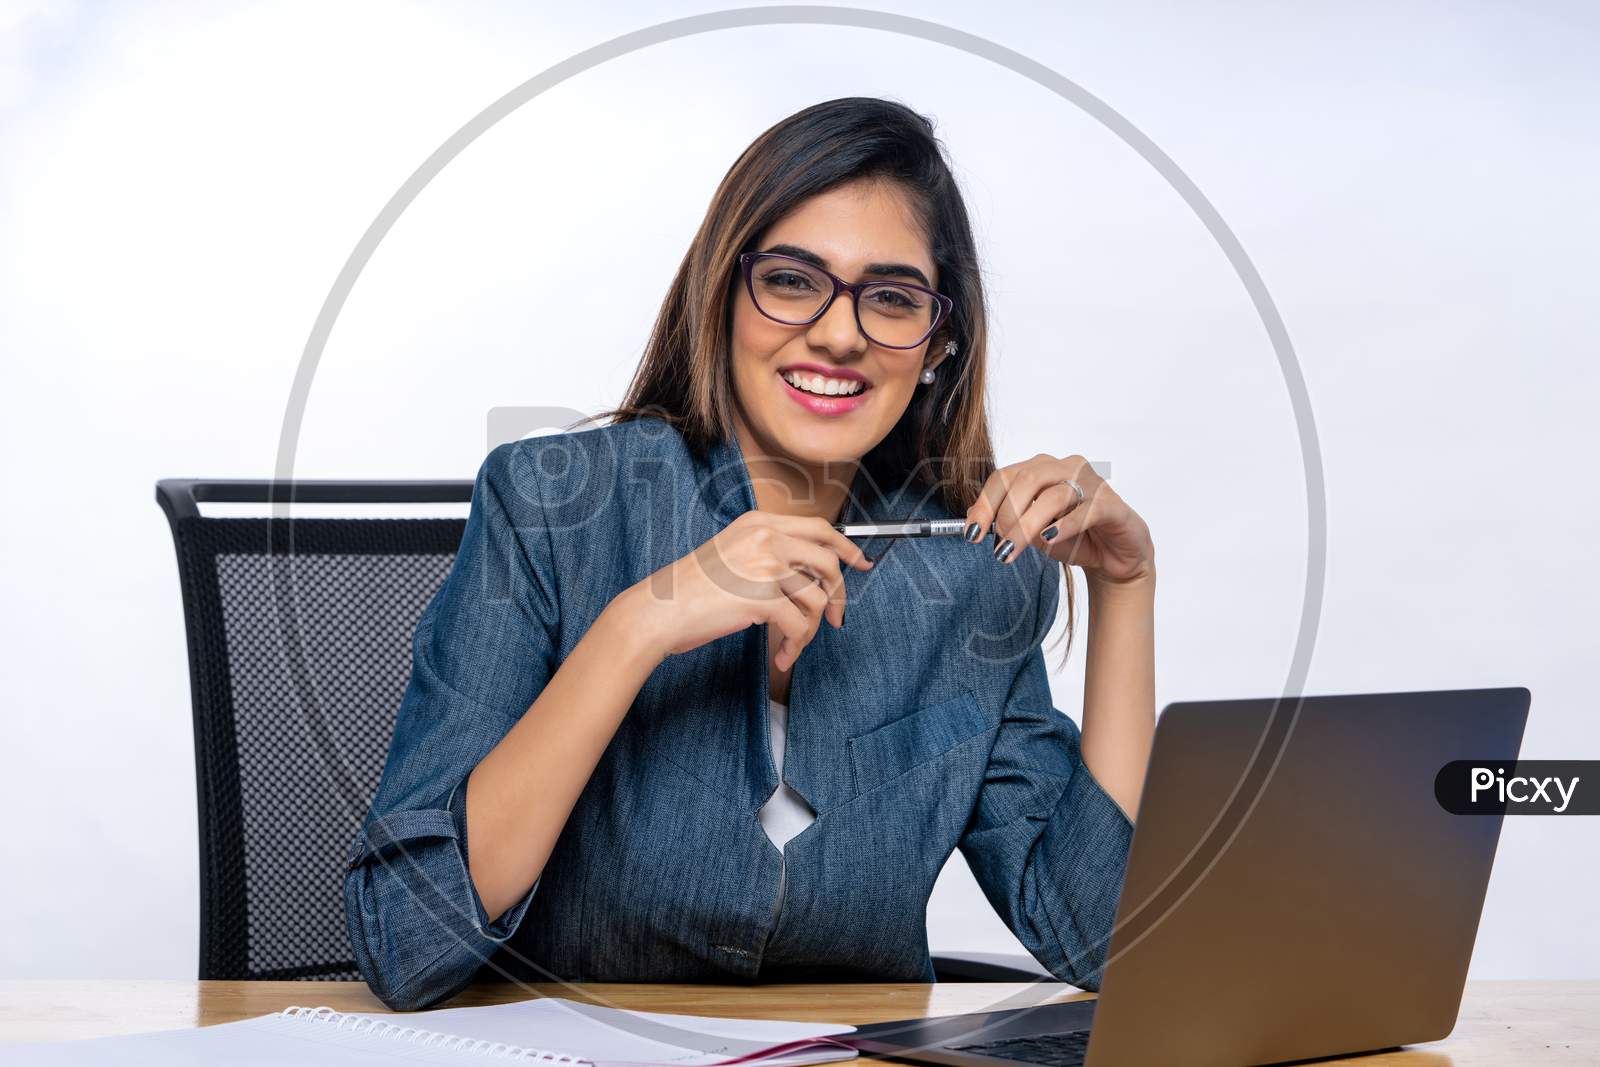 Smiling Indian confident young woman working with a Laptop